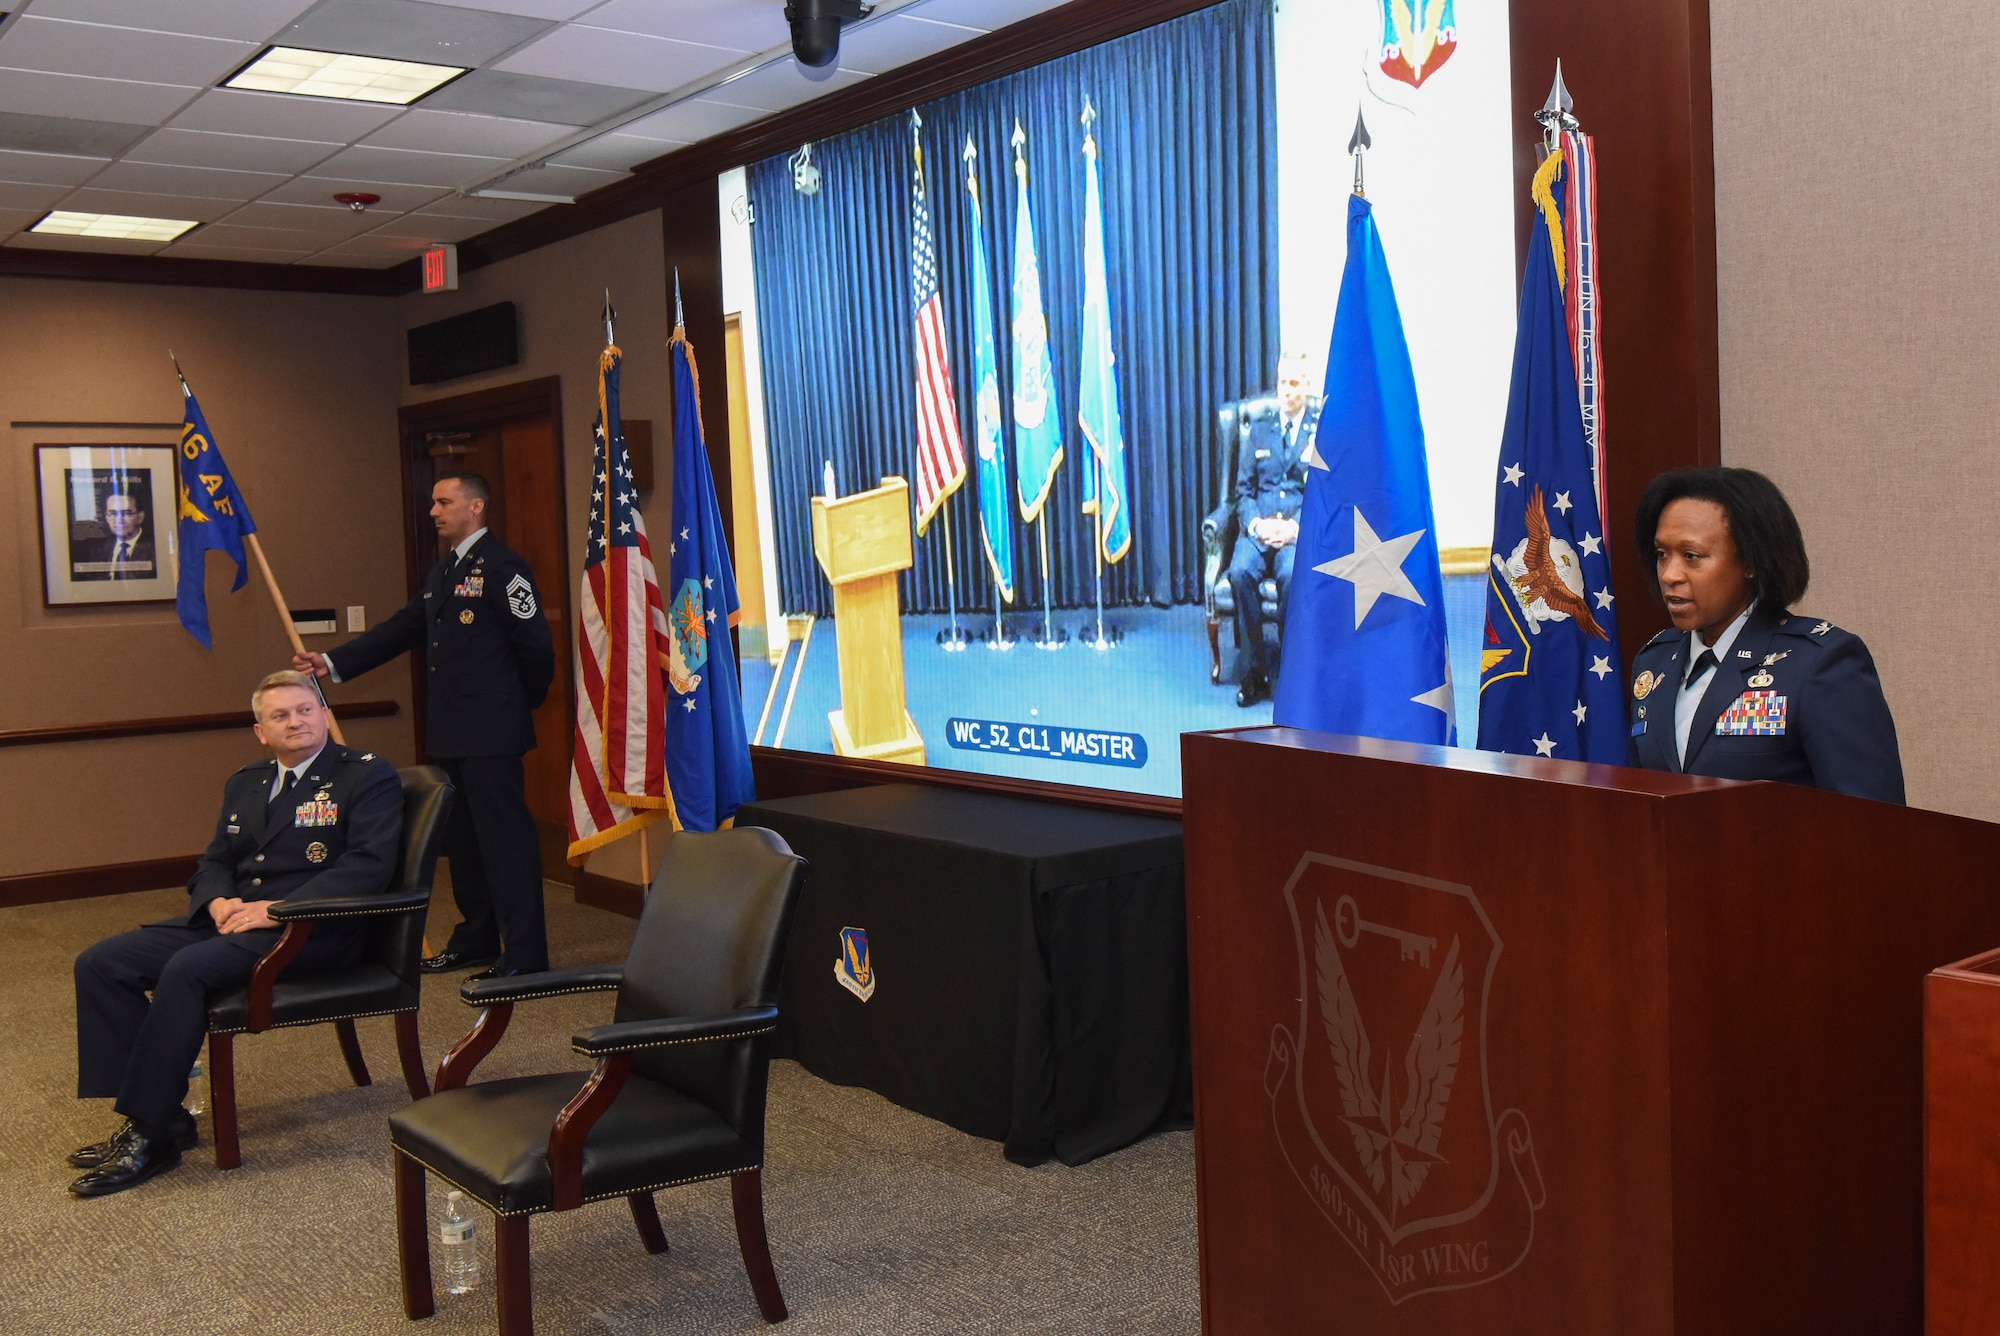 U.S. Air Force Col. Kayle Stevens, the new 480th Intelligence, Surveillance and Reconnaissance Wing commander, speaks to all the virtual attendees during the change of command ceremony at Joint Base Langley-Eustis, Va., June 9, 2020. Stevens will direct the wing's comprehensive set of ISR capabilities include lead wing designation for the Air Force Distributed Common Ground System, as well as national cryptologic, information technology, and tactical analysis. (U.S. Air Force photo by Tech. Sgt. Darnell T. Cannady)